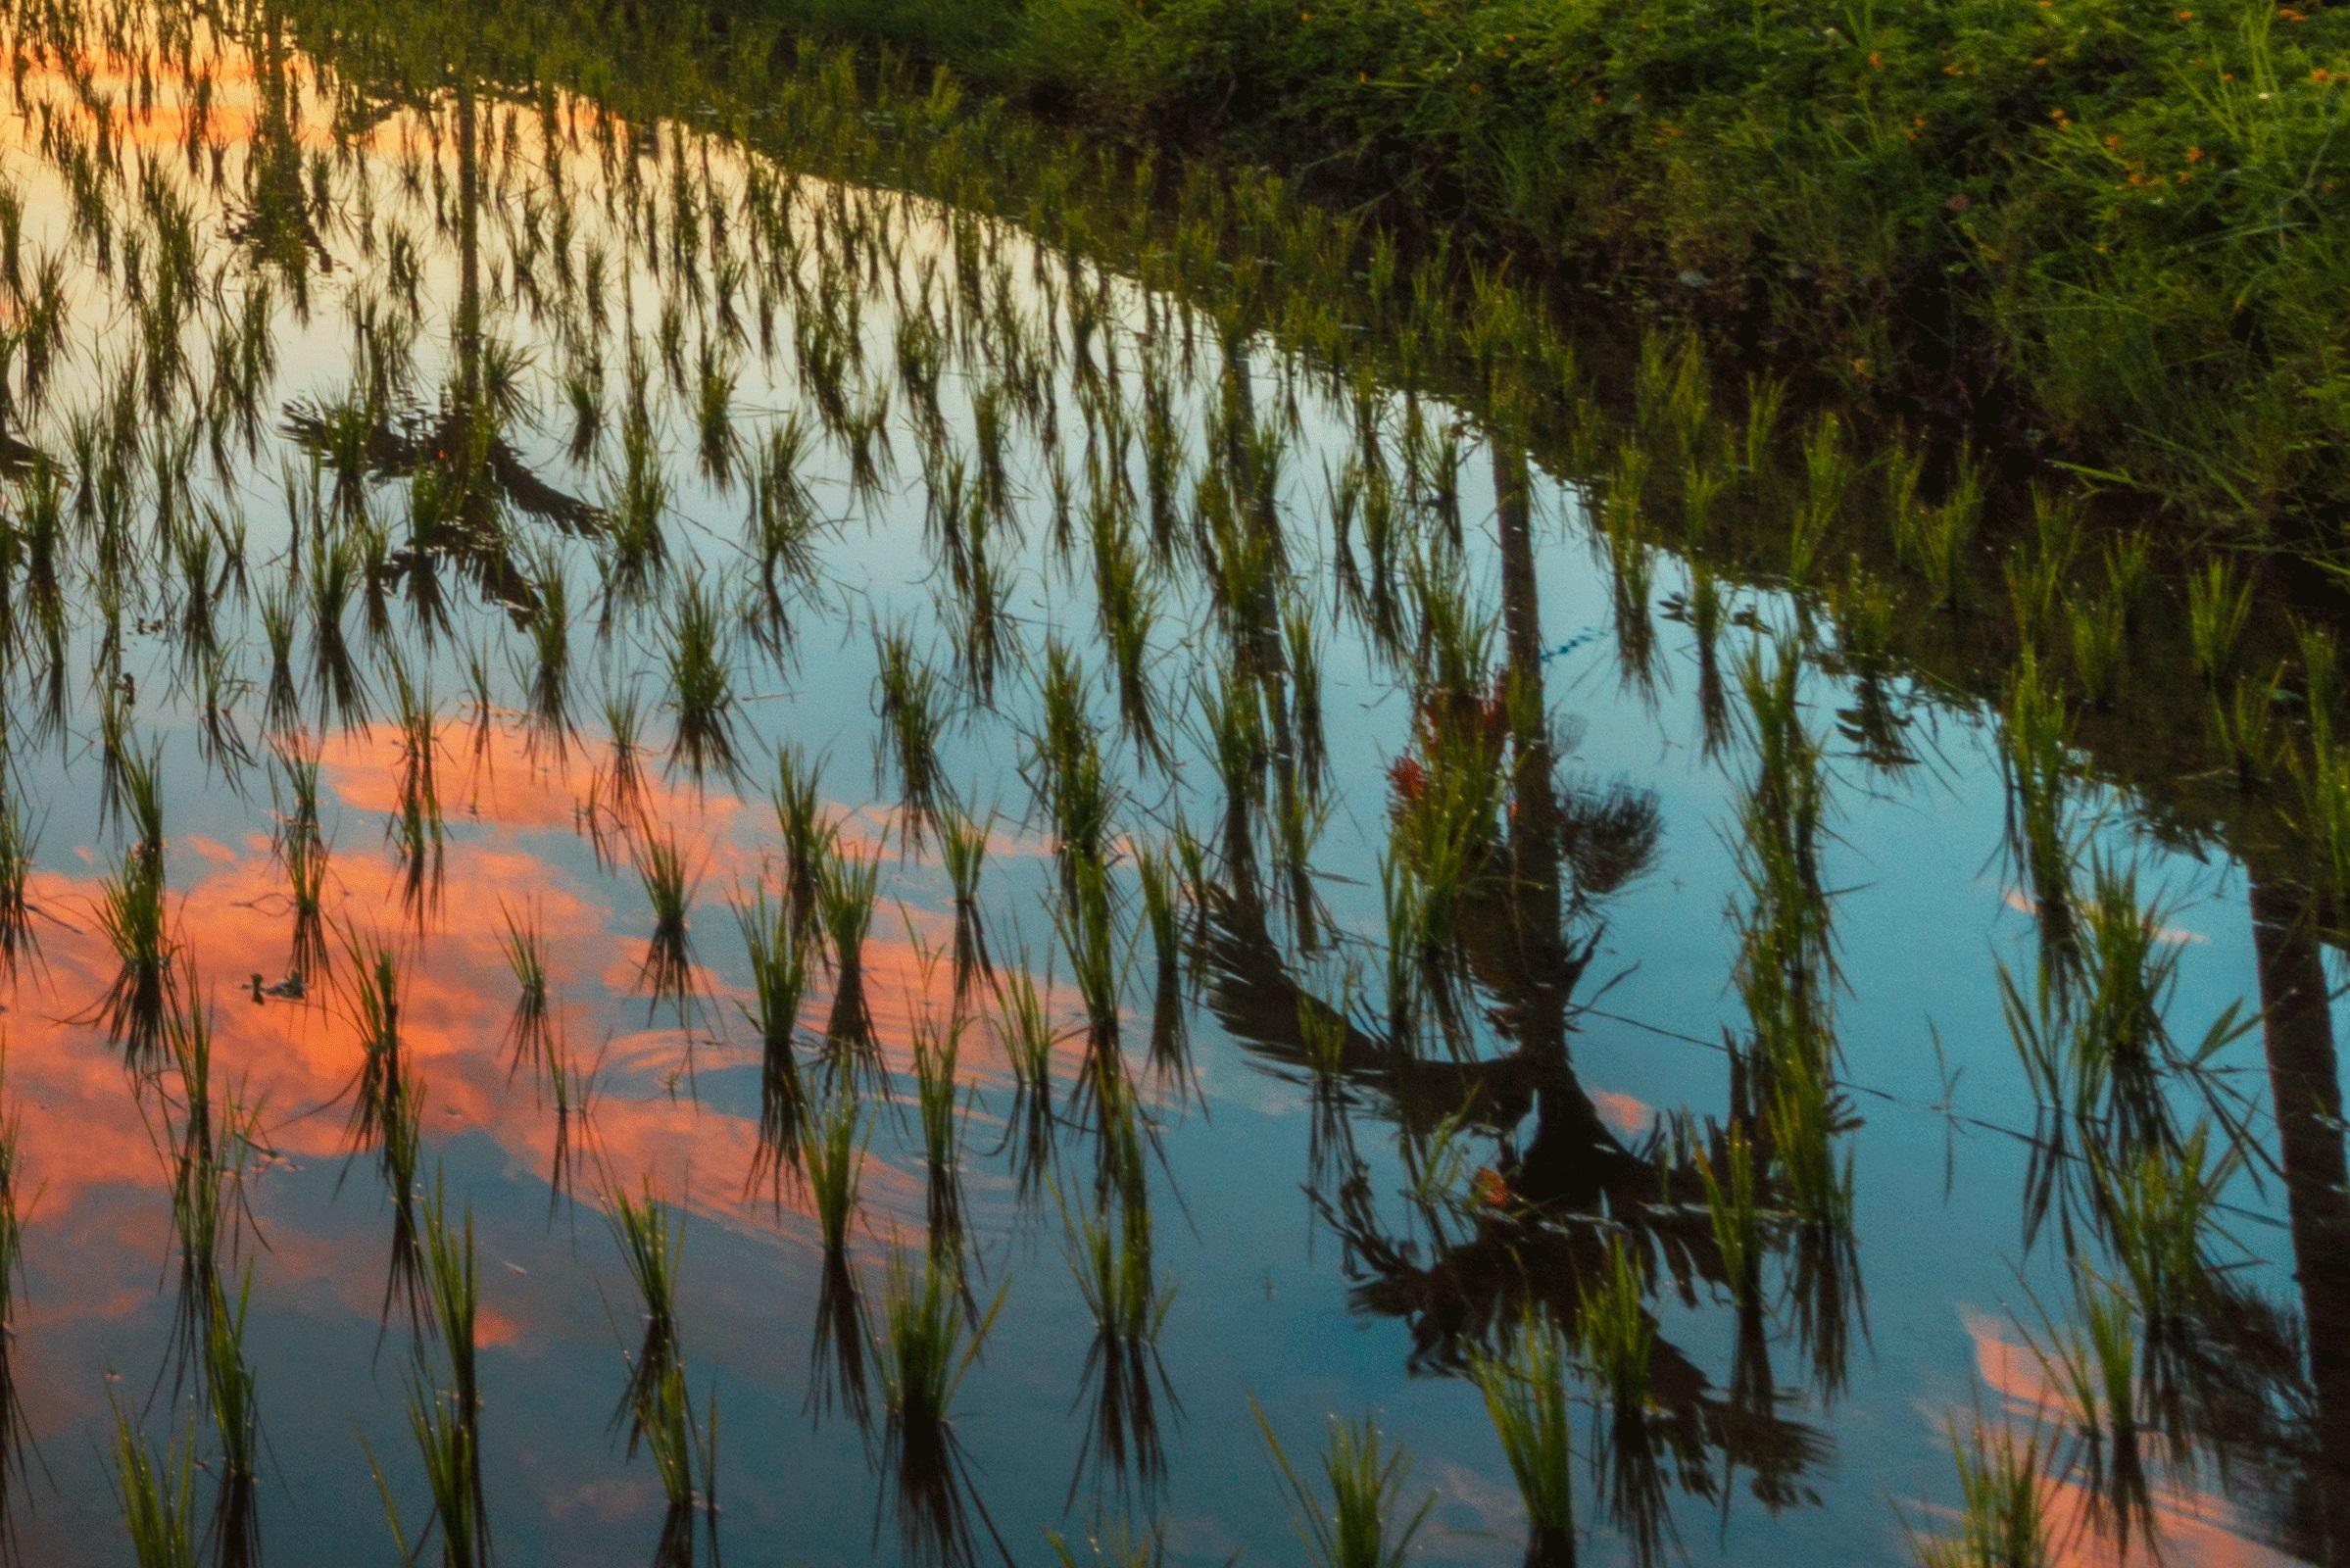 Bali, Asia - Photography Dibond Travel  Landscape Nature Ricefield Sunset Colour For Sale 4